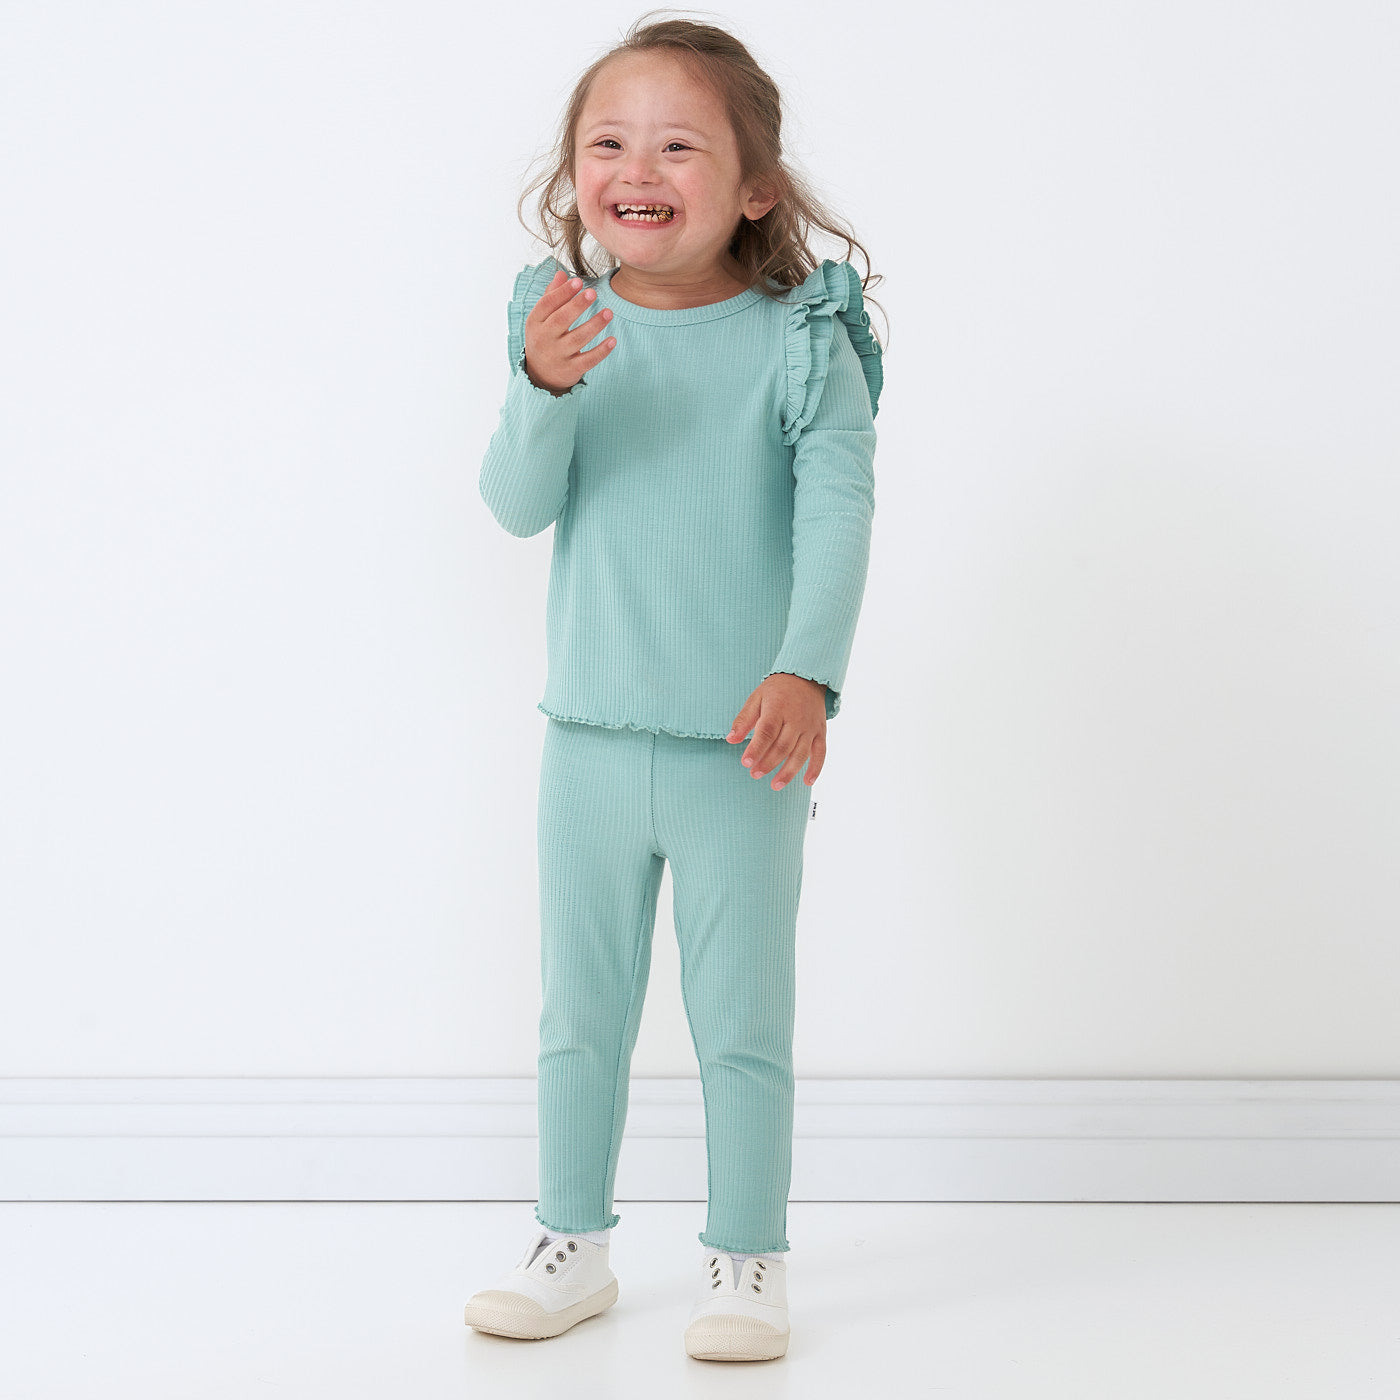 Child wearing a Aqua Mist Ribbed Flutter Lettuce Tee paired with matching leggings